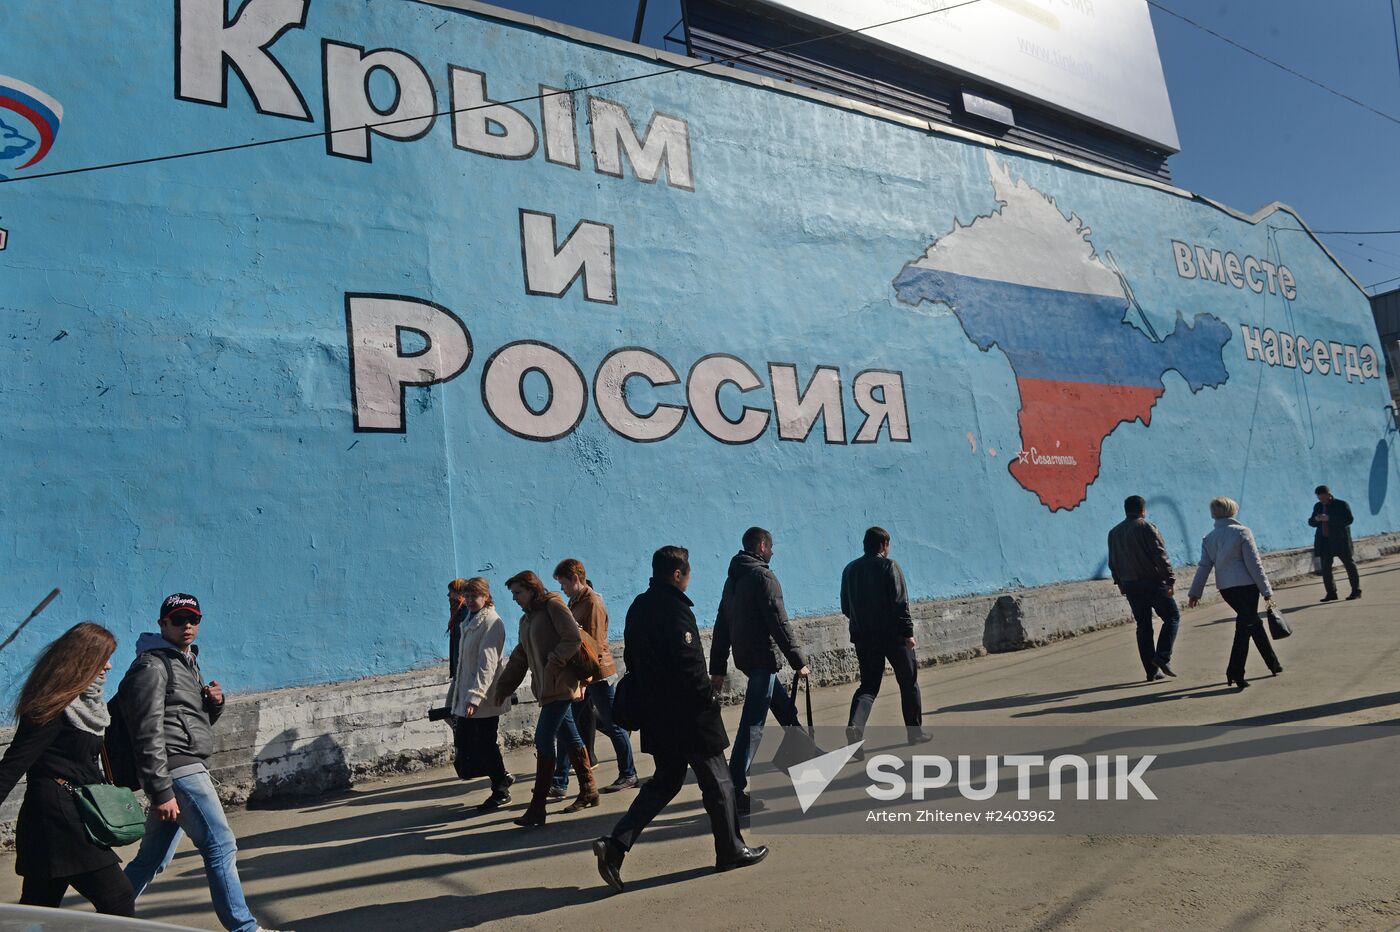 Patriotic graffiti in Moscow related to Crimea's reuniting with Russia